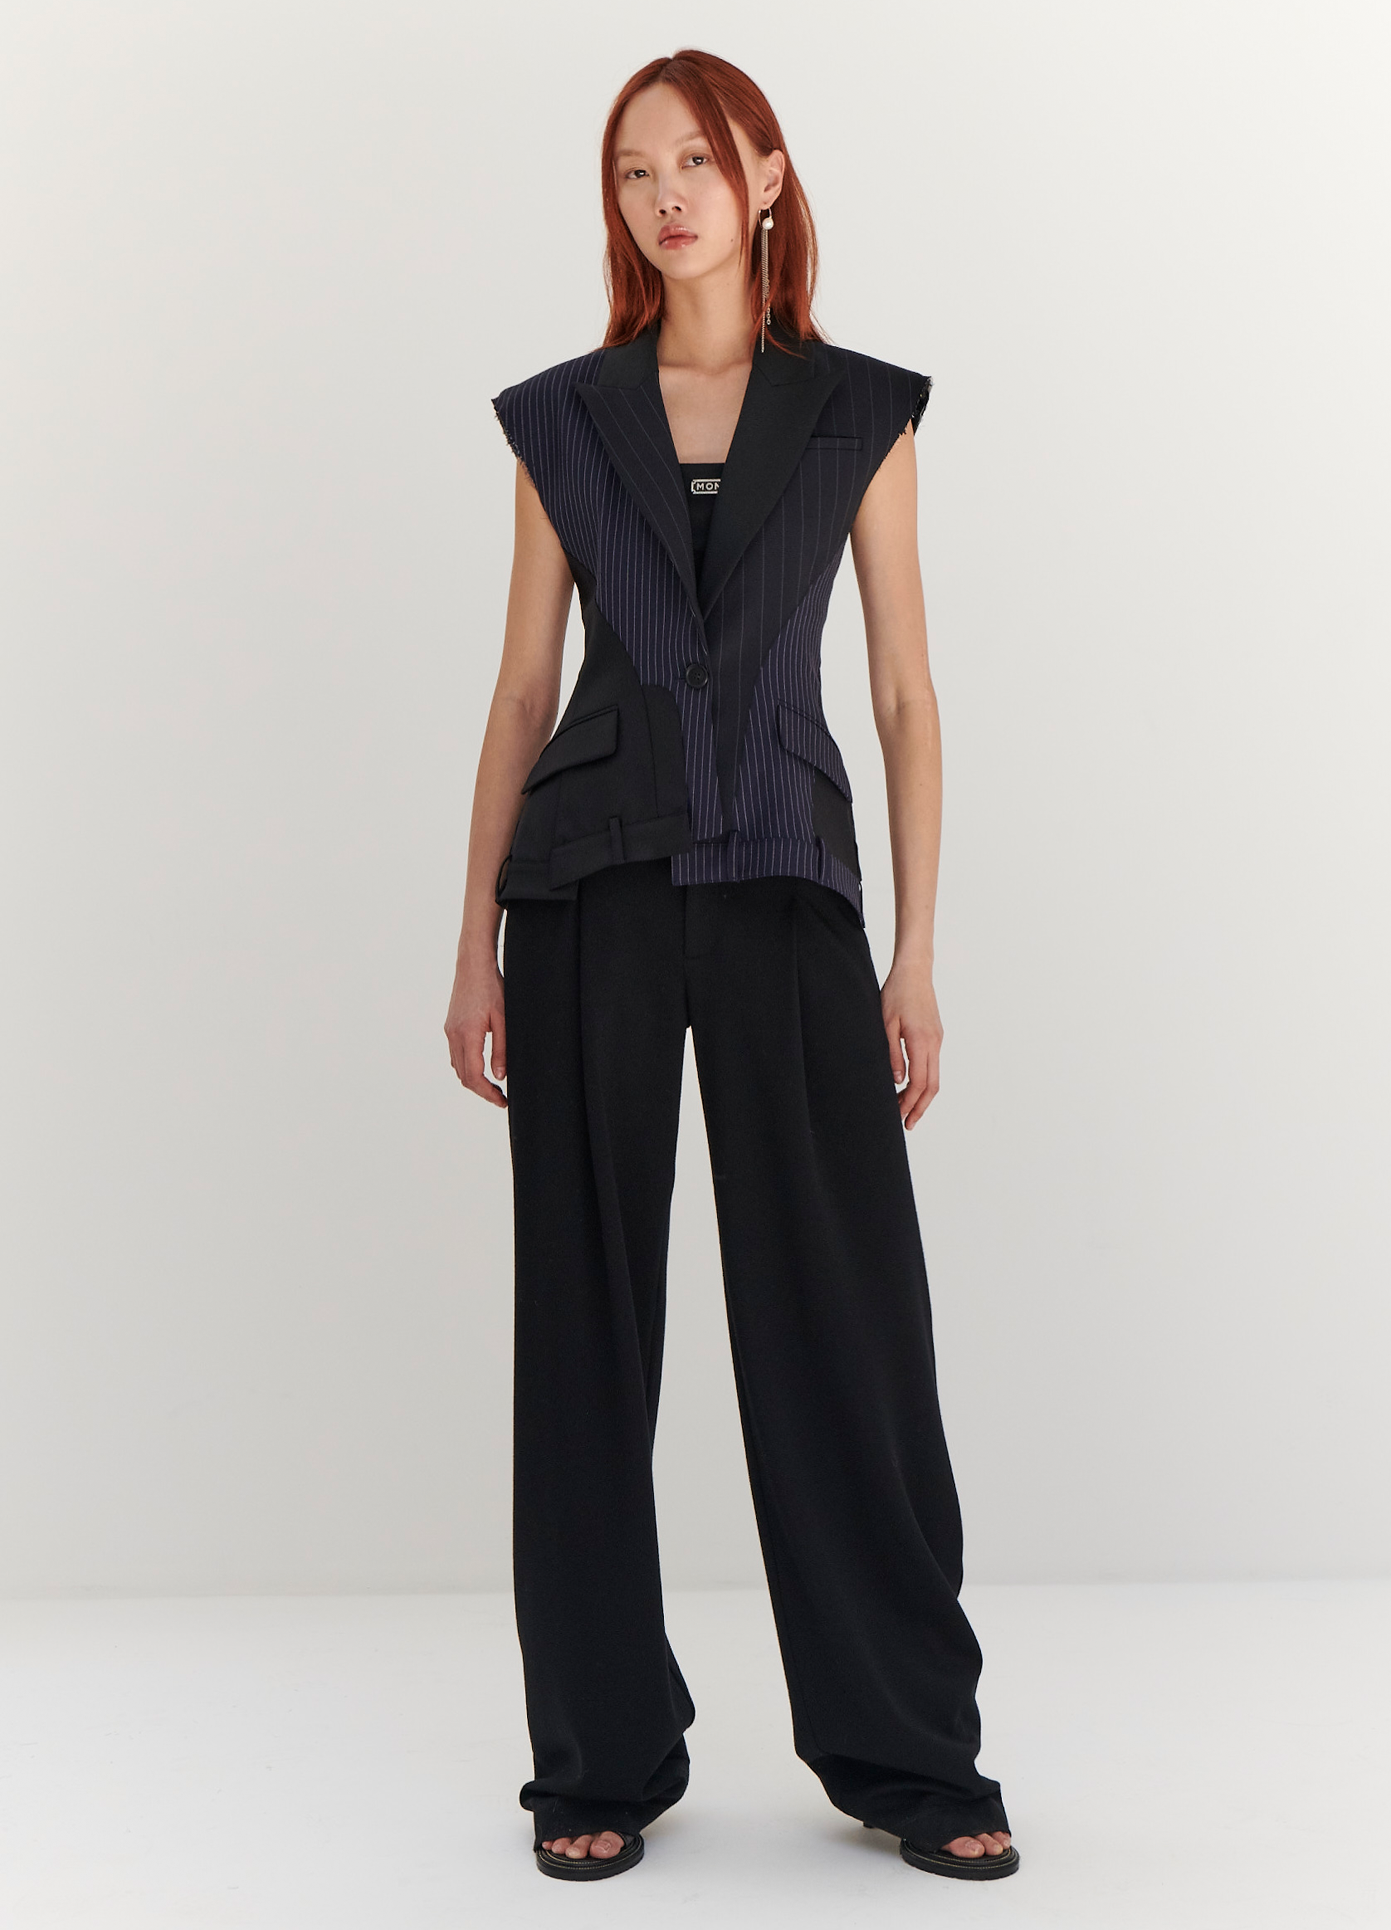 MONSE Deconstructed Sleeveless Jacket in Midnight on model full front view